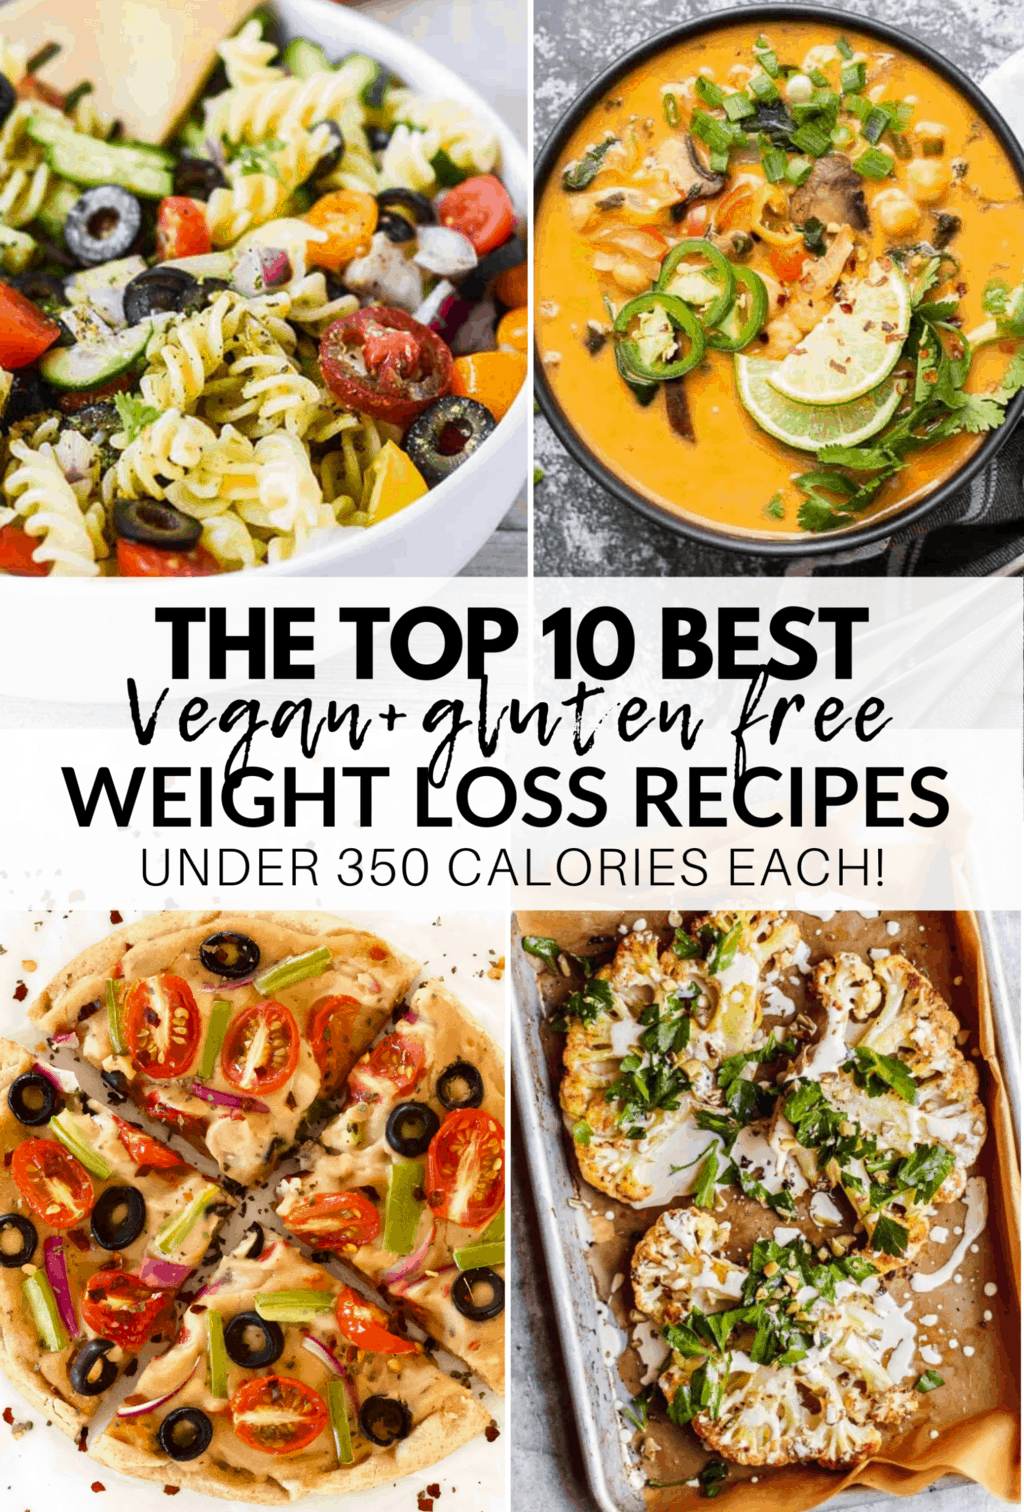 The Top 10 Vegan Recipes for Weight Loss! All recipes are gluten-free & low-calorie – under 350 calories each! These recipes will help you lose weight in a delicious, healthy & satisfying way.